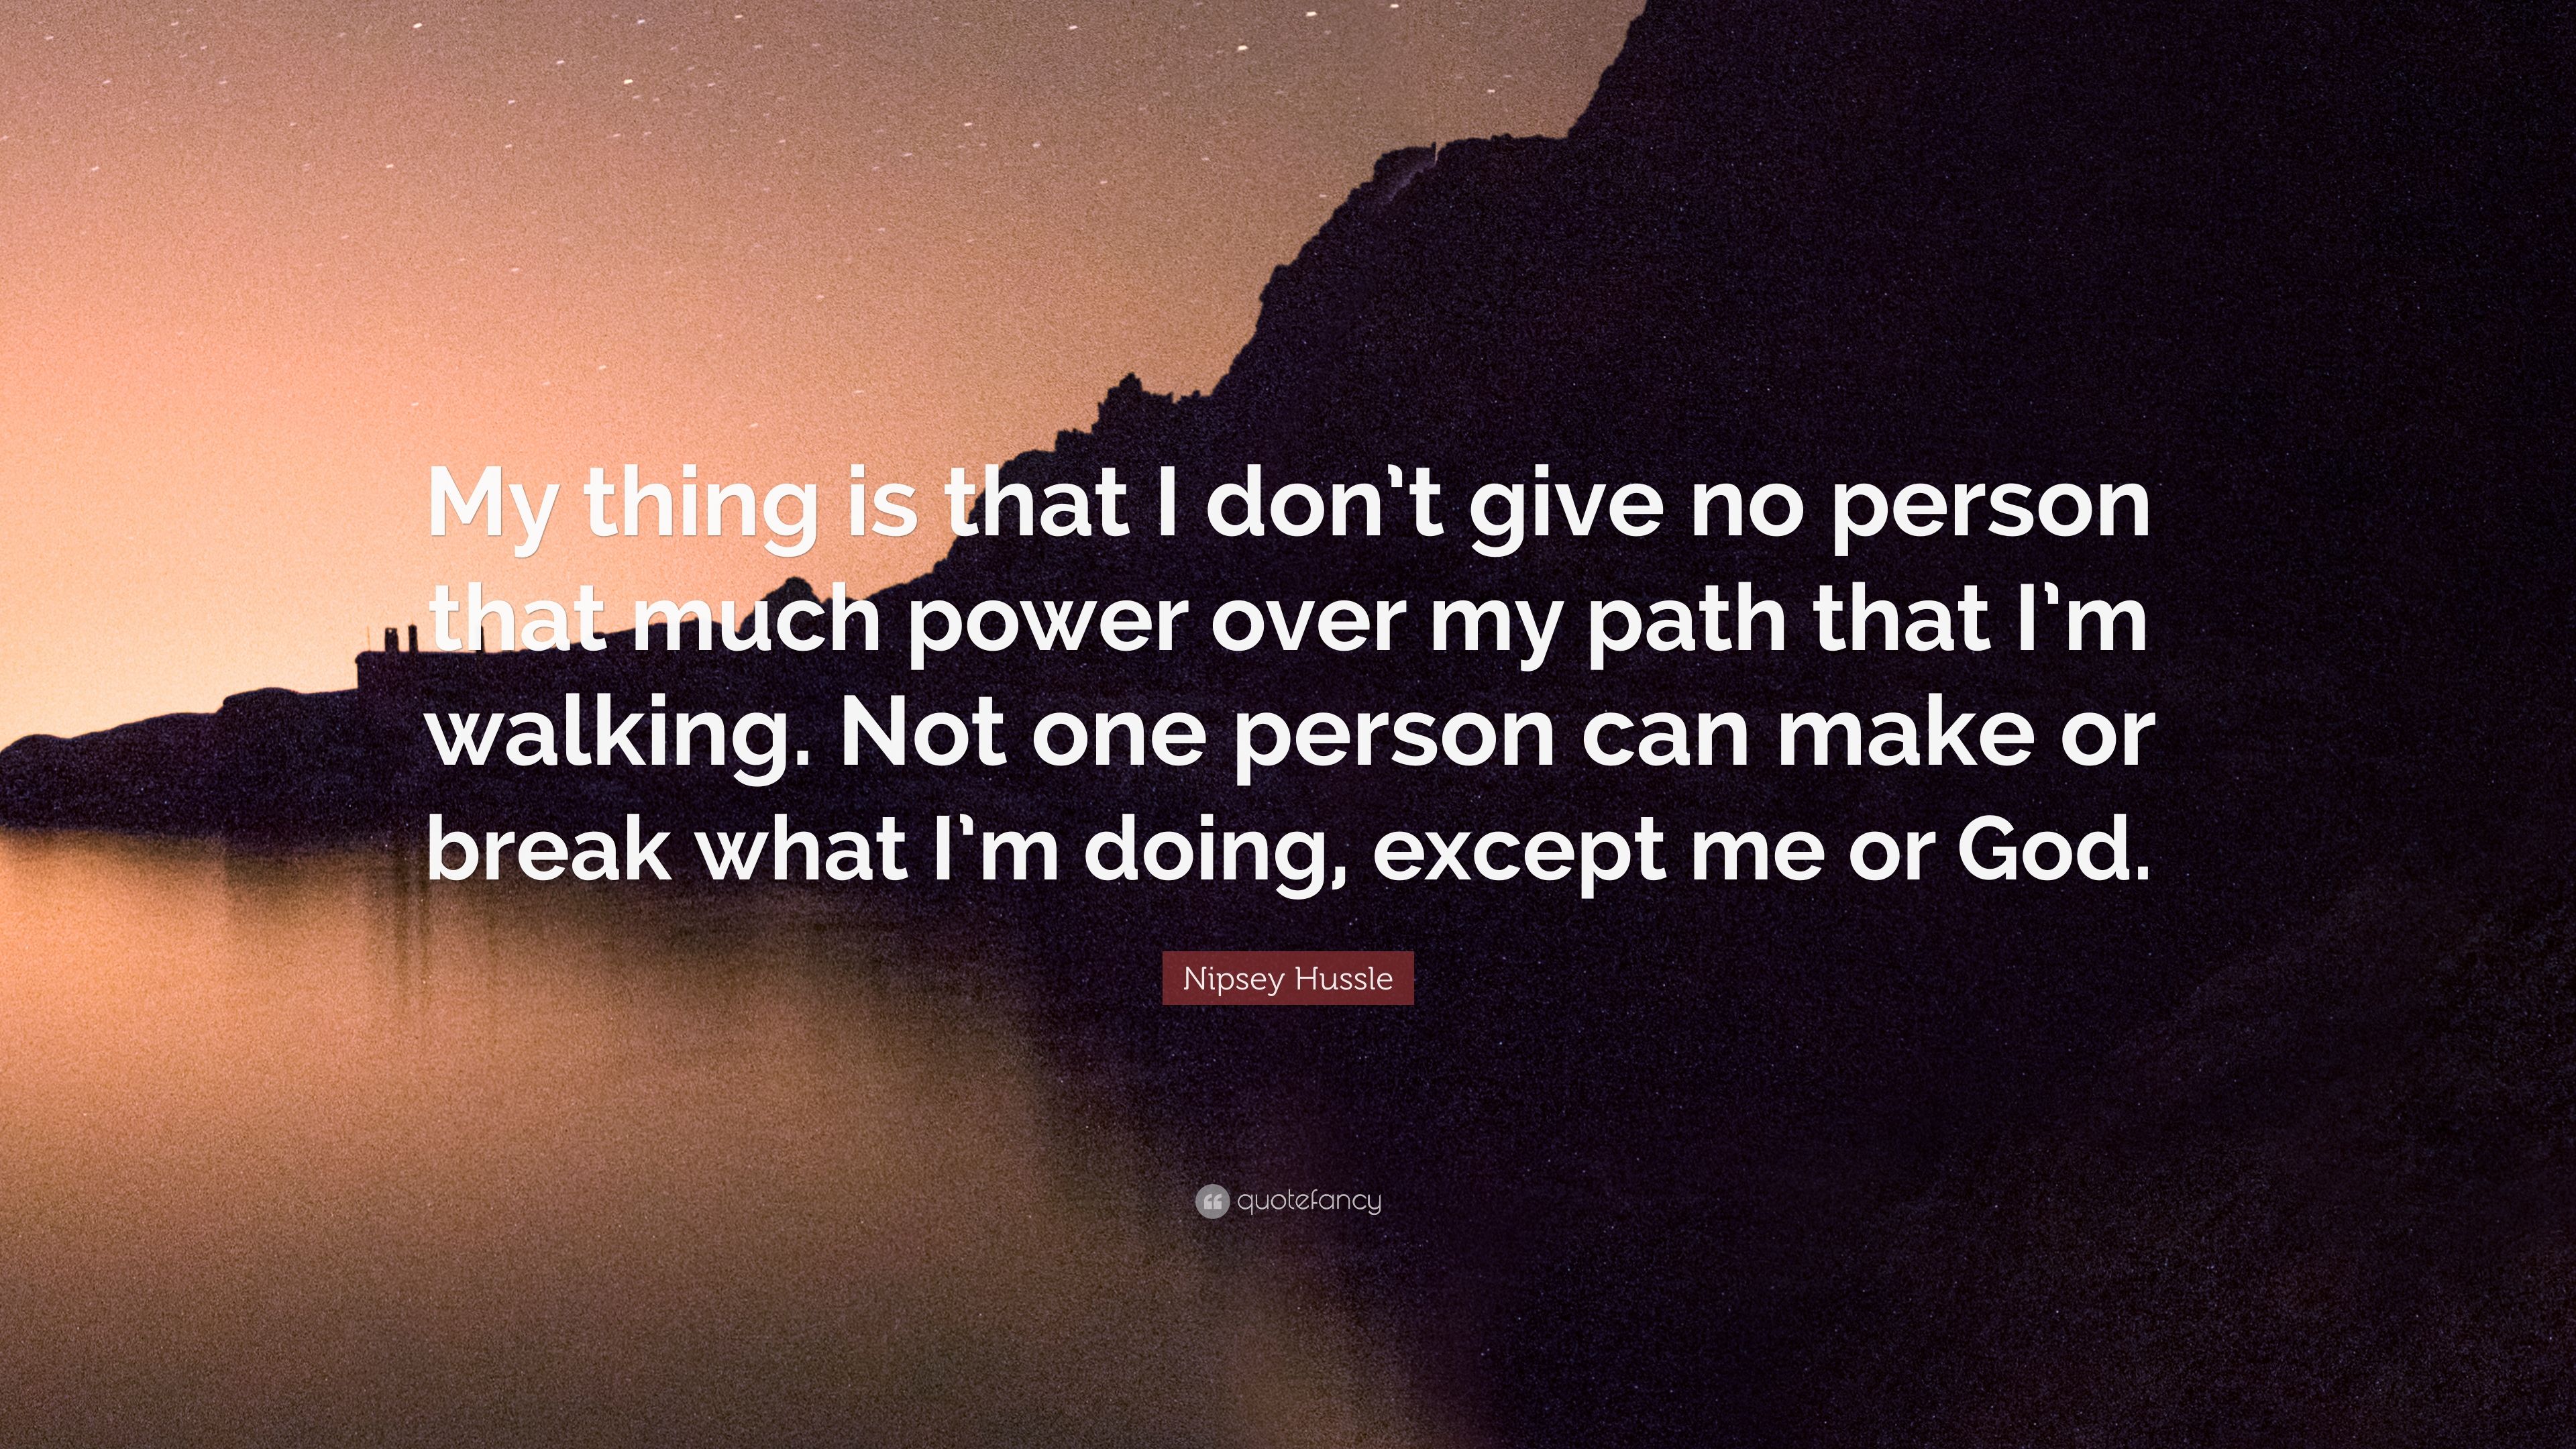 Nipsey Hussle Quote: “My thing is that I don't give no person that